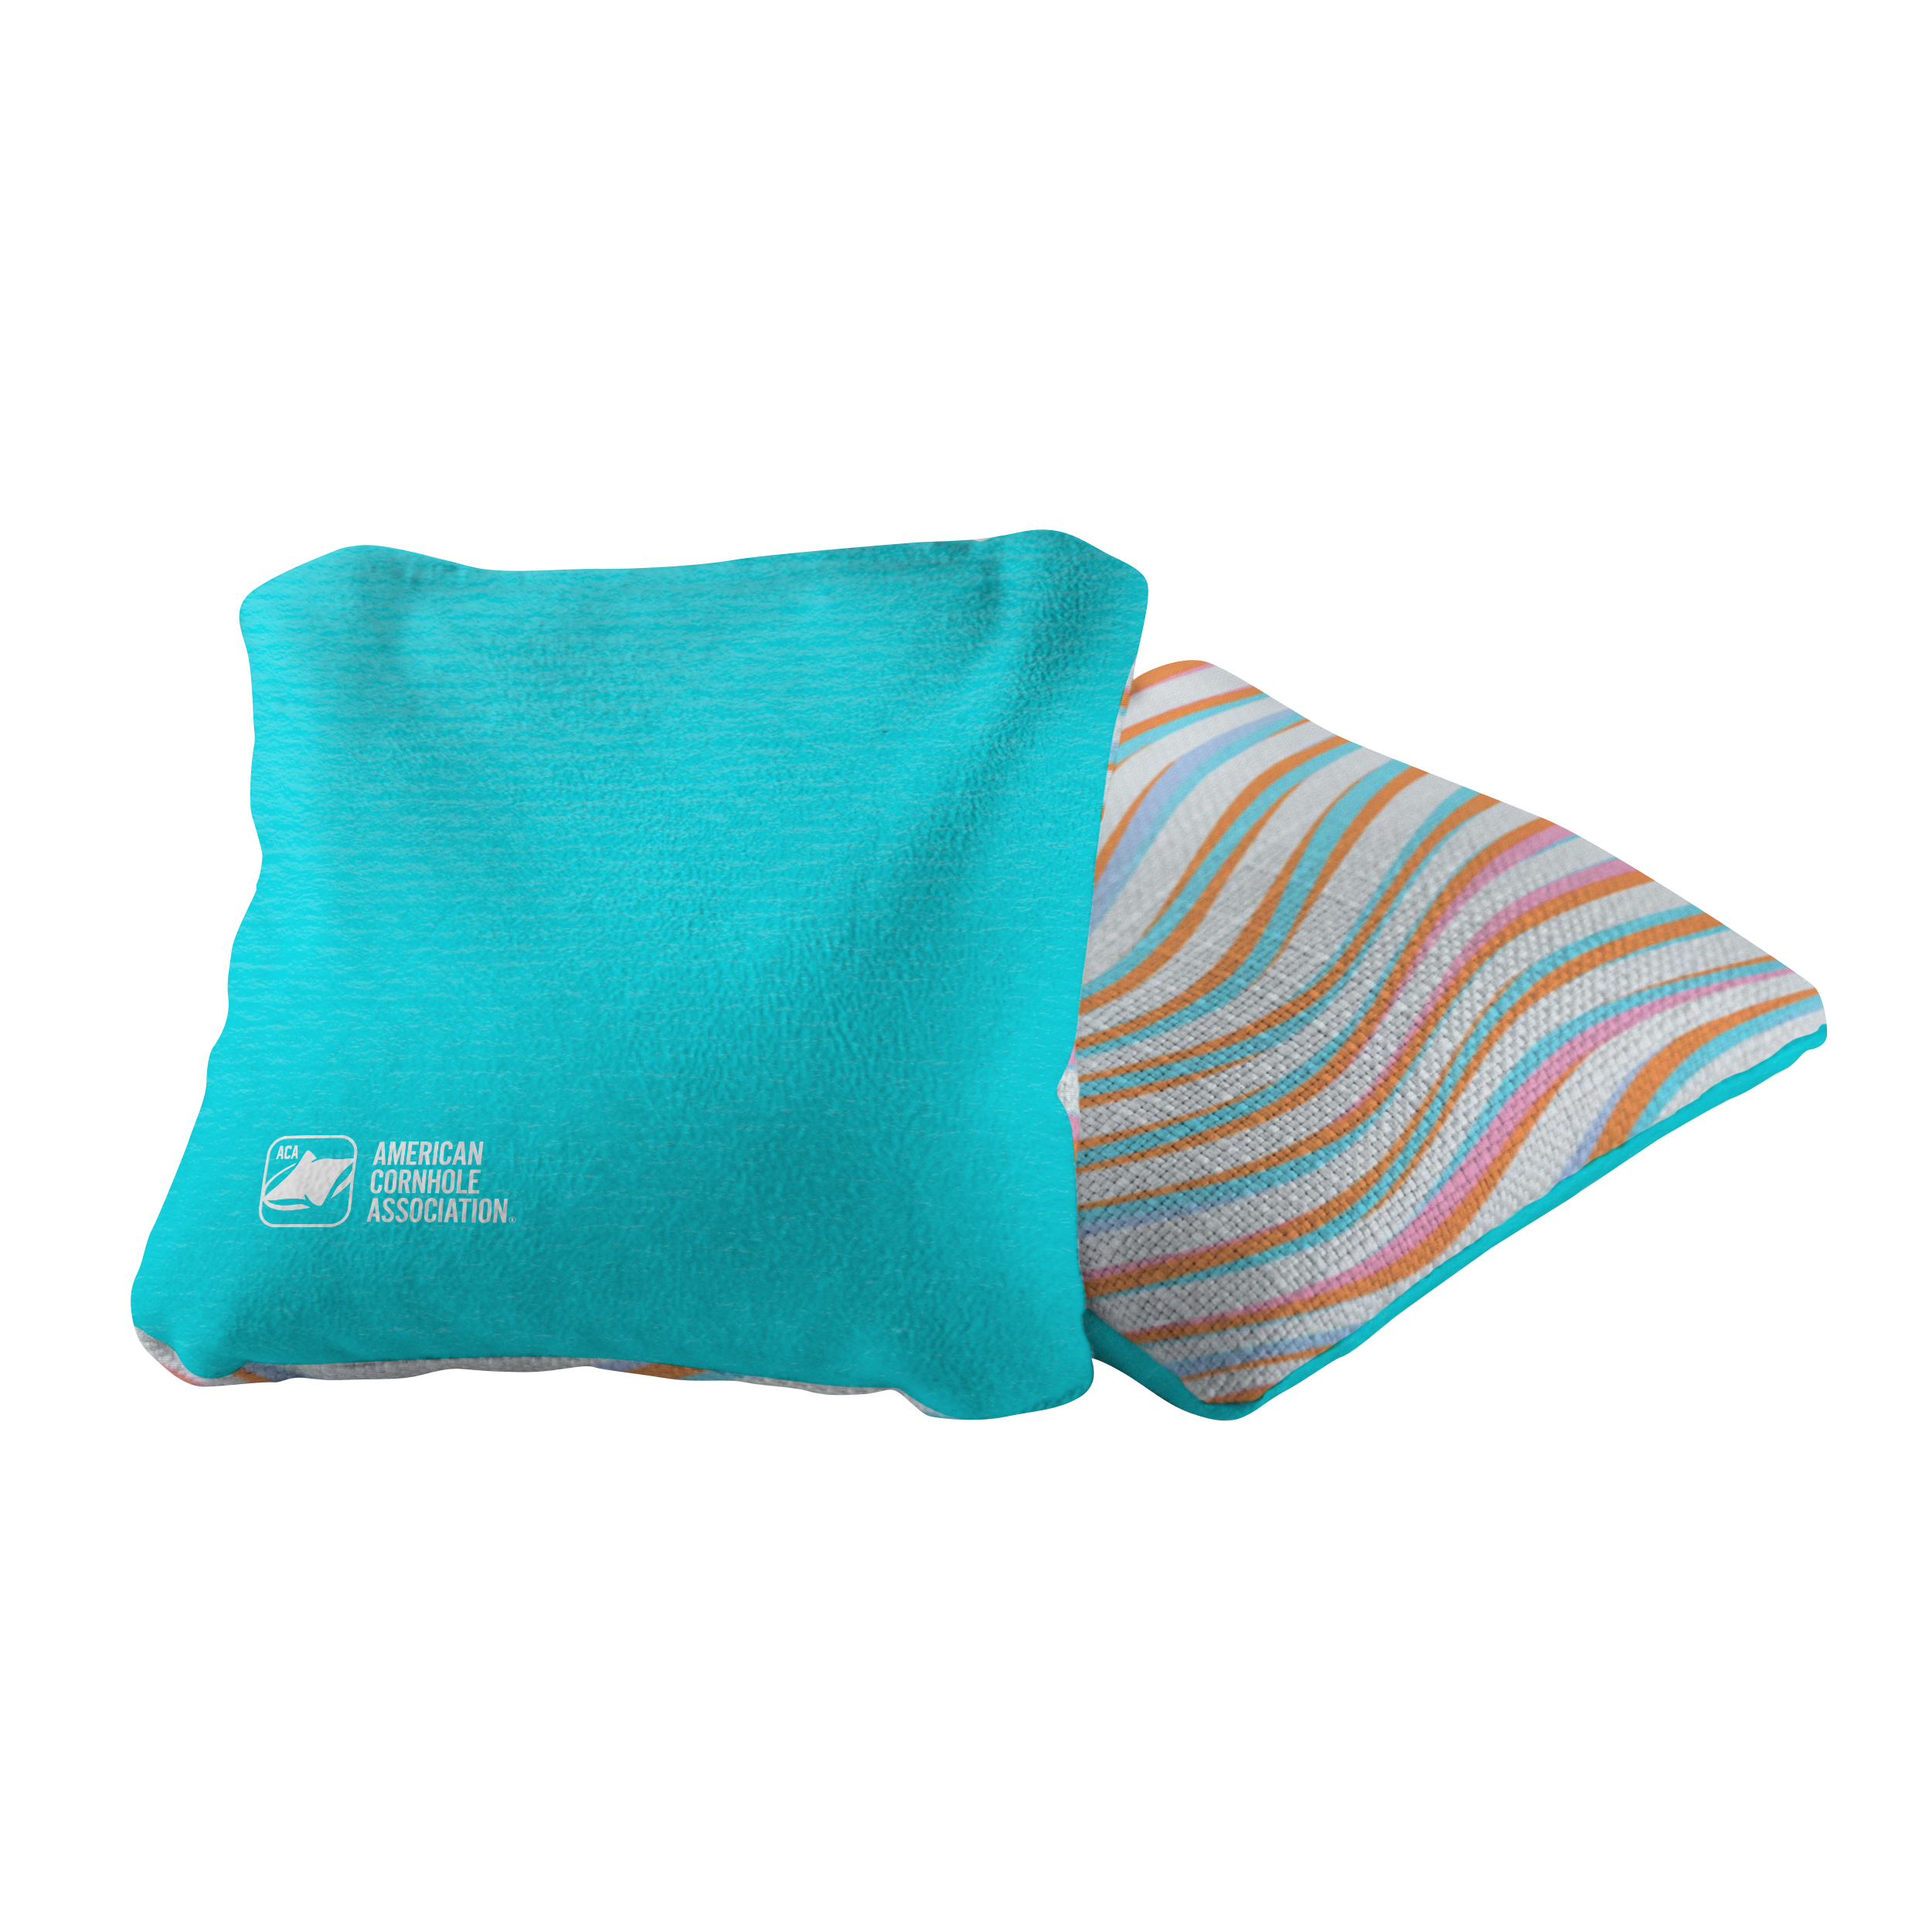 6-in Synergy Pro Teal with Waves Professional Regulation Cornhole Bags